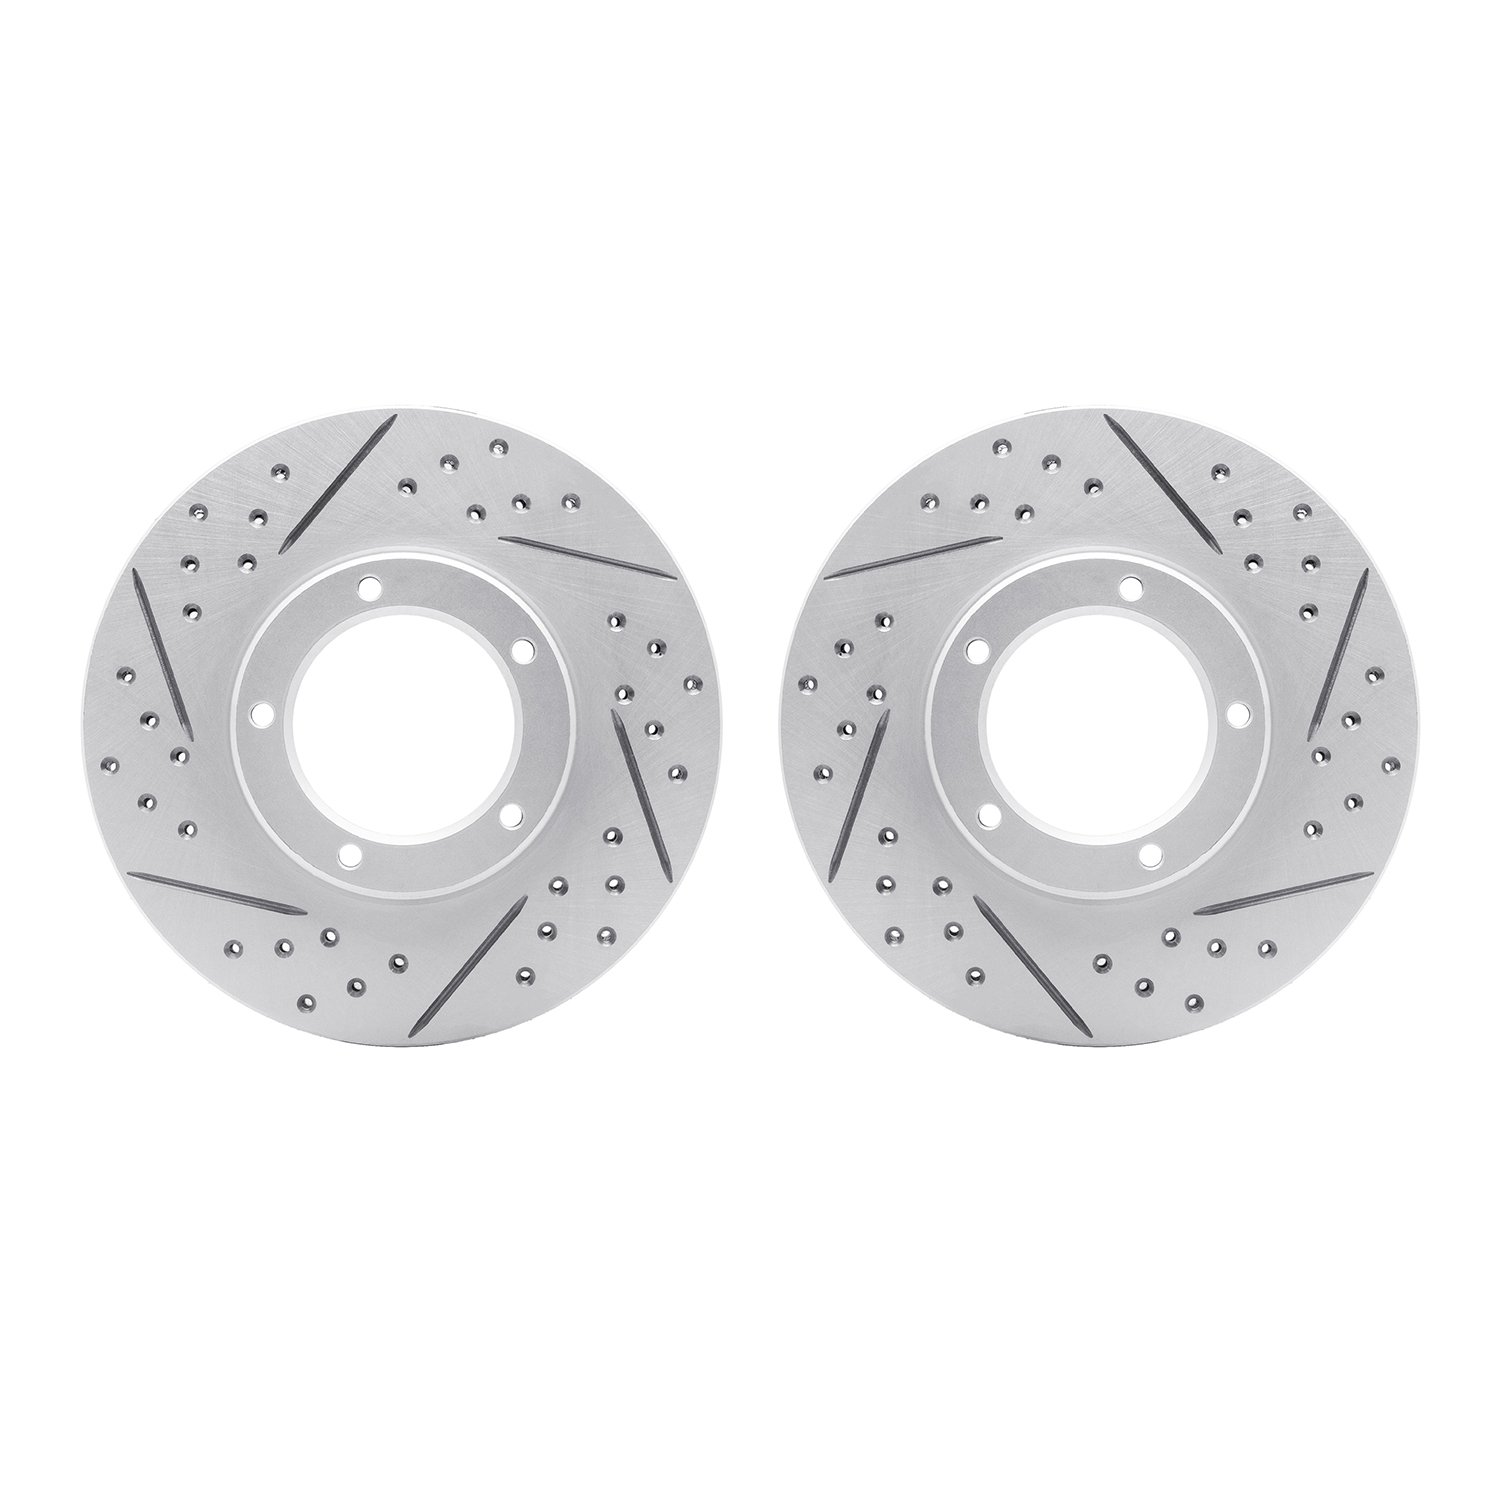 2002-76035 Geoperformance Drilled/Slotted Brake Rotors, 1995-2004 Lexus/Toyota/Scion, Position: Front